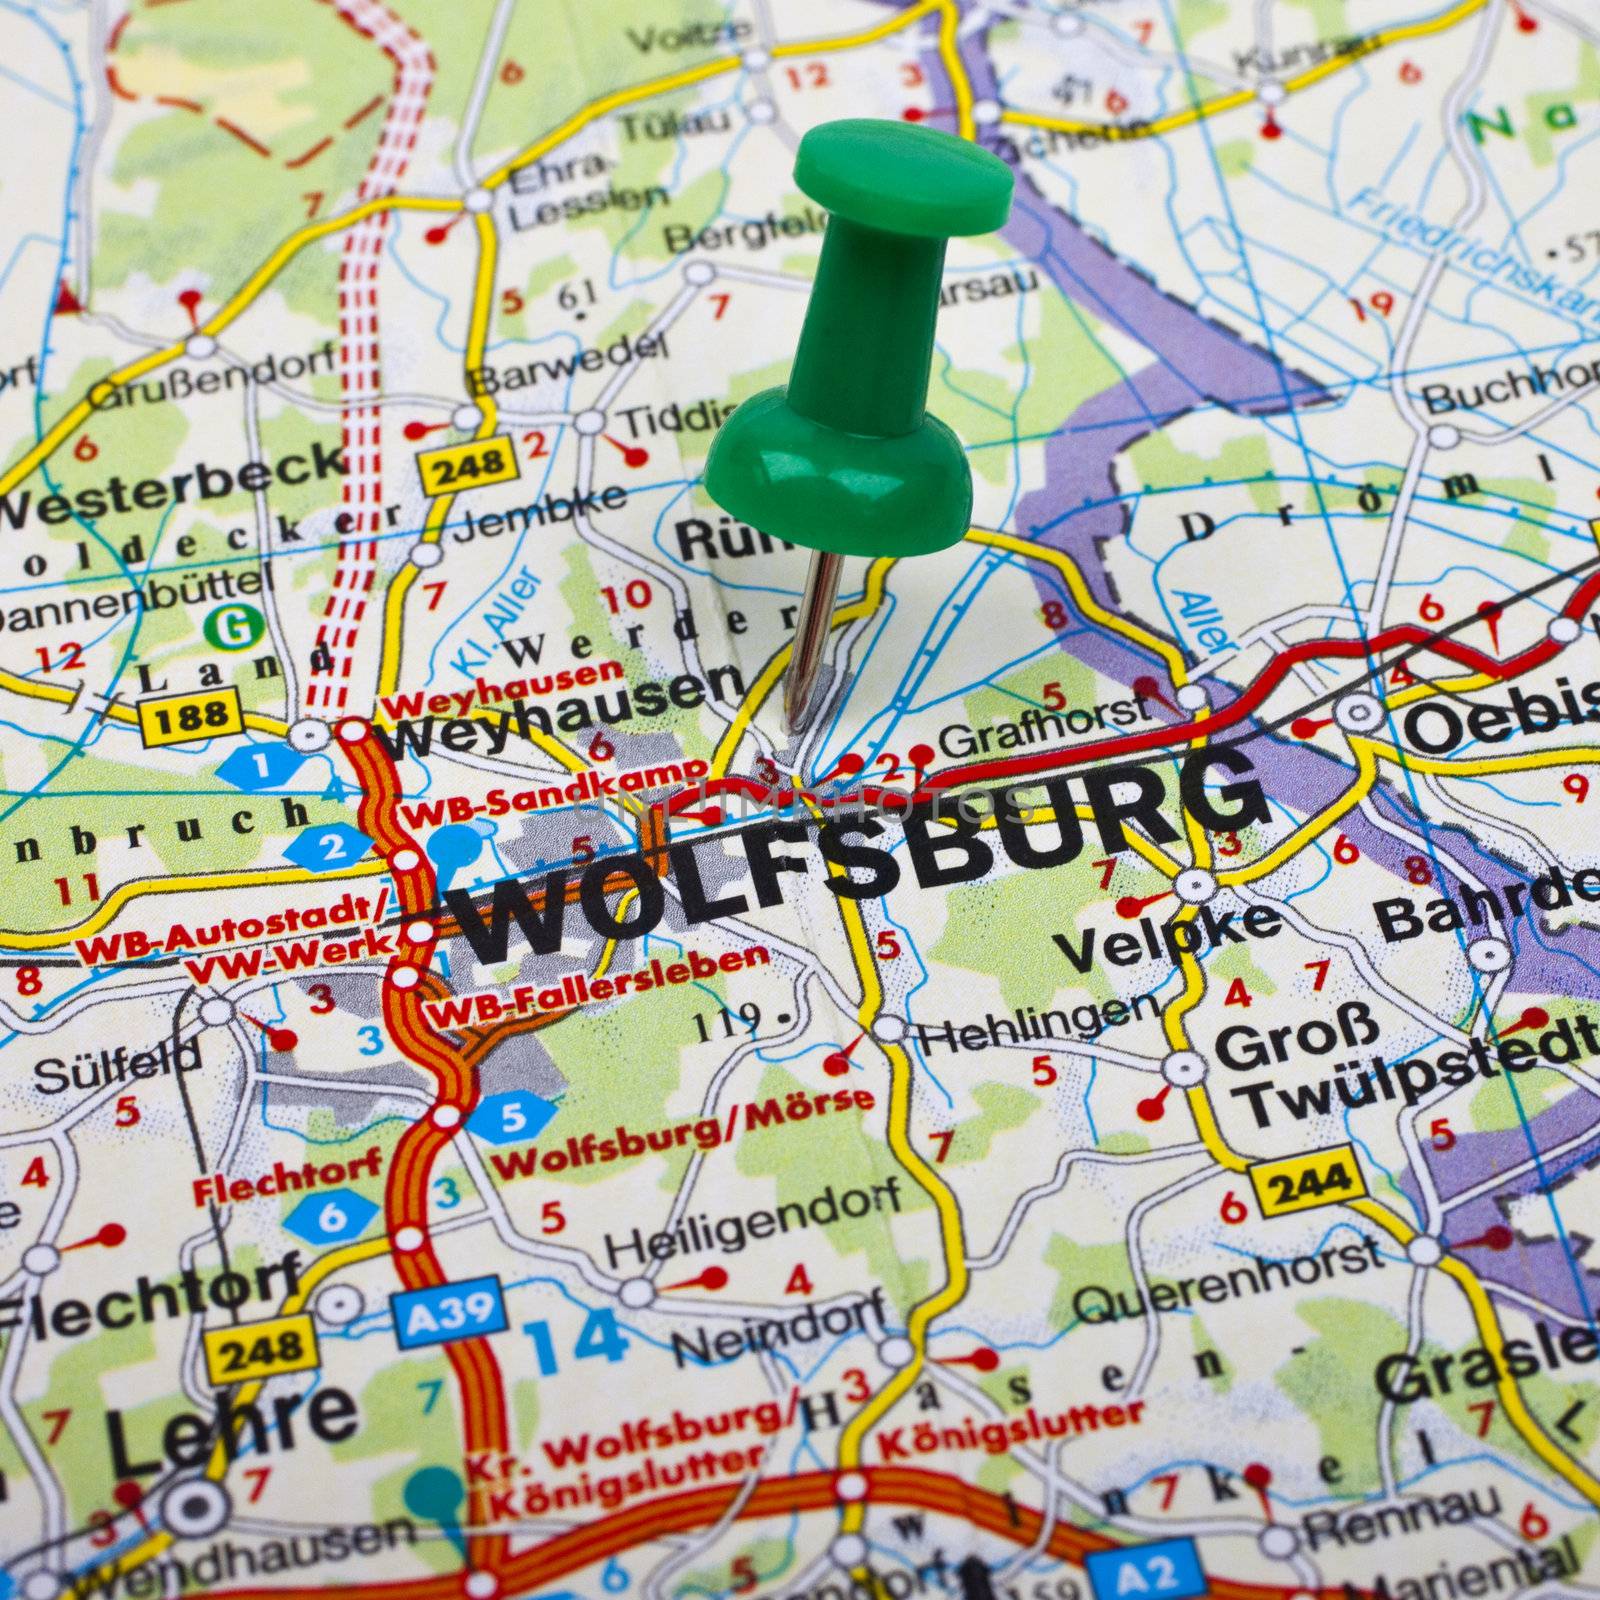 Wolfsburg pin-pointed on a map.